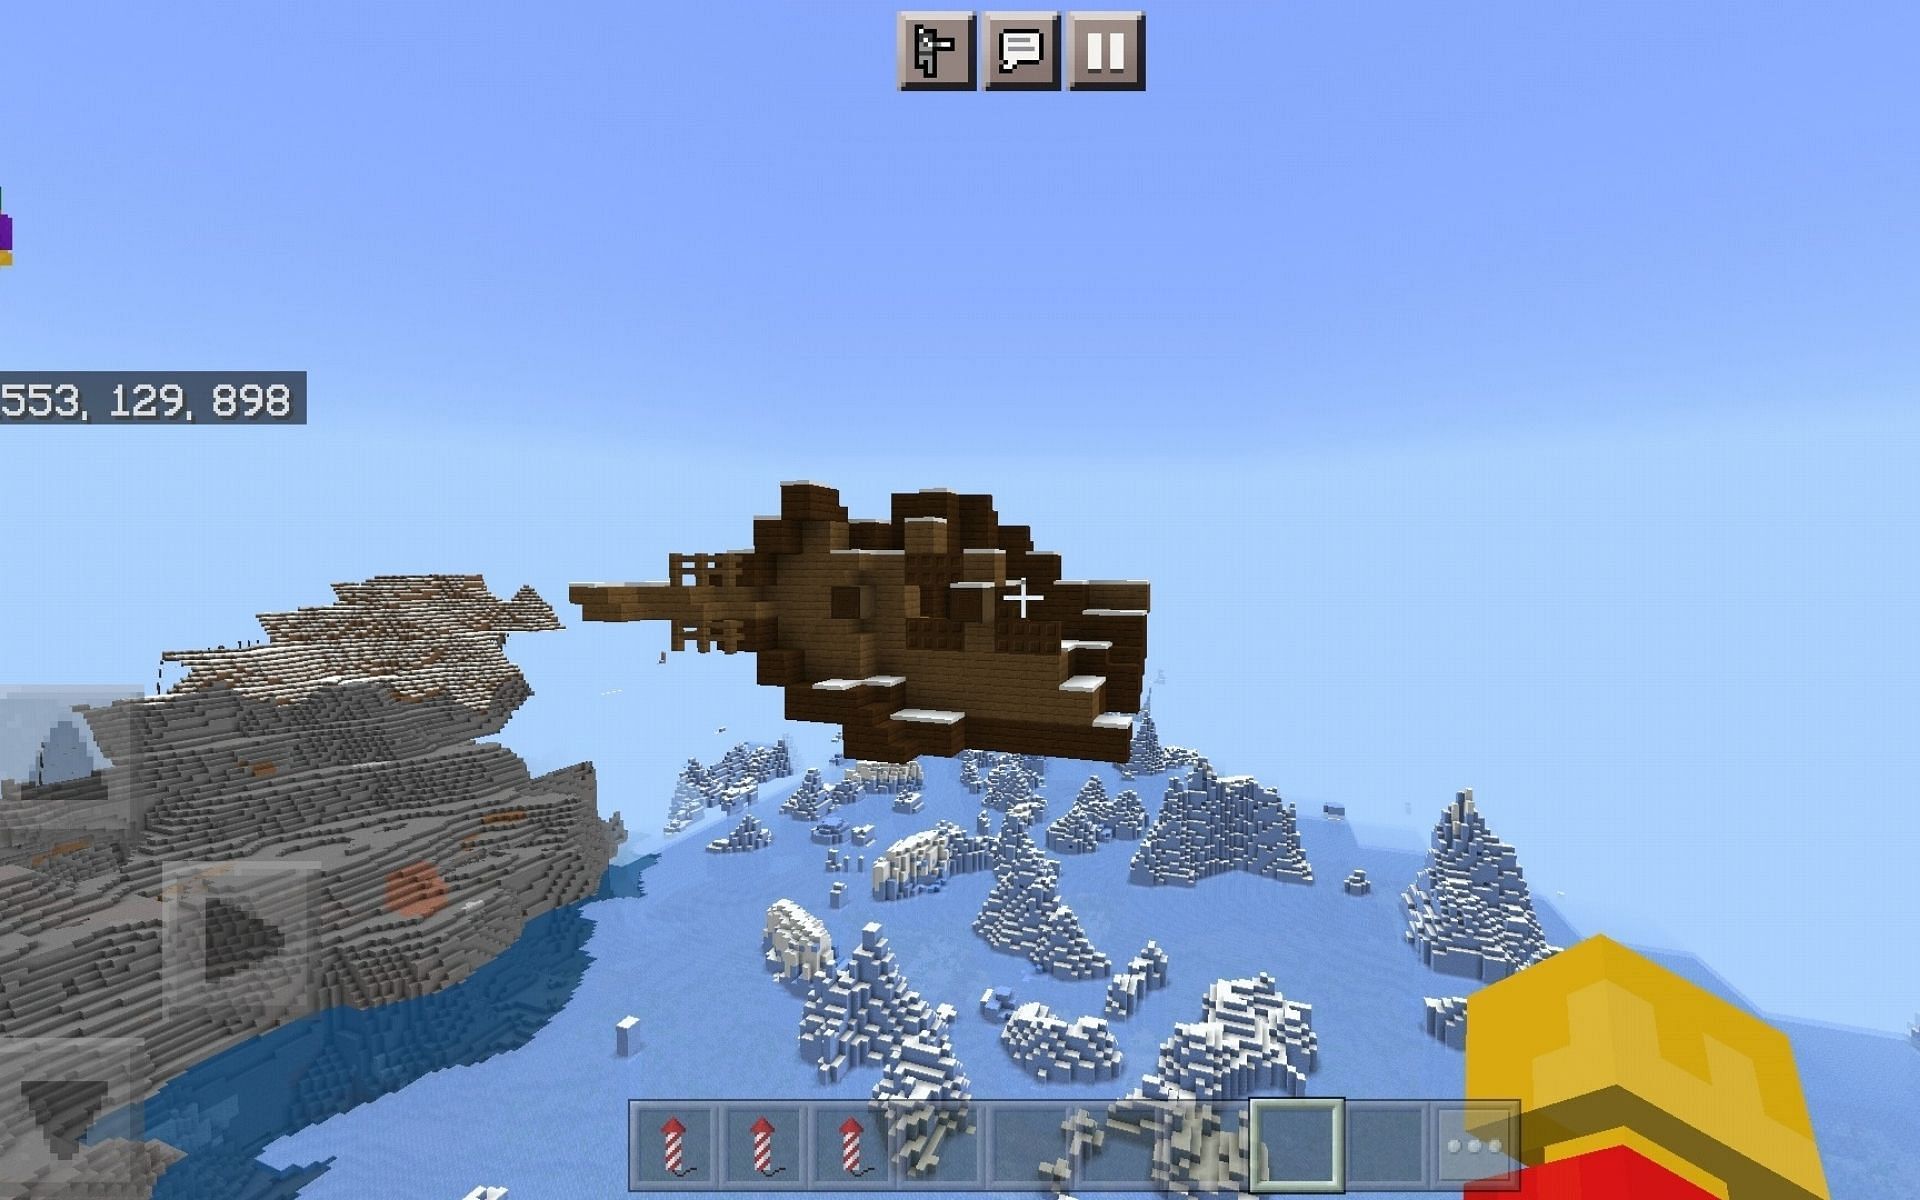 Shipwreck suspended in the sky (Image via Mojang)